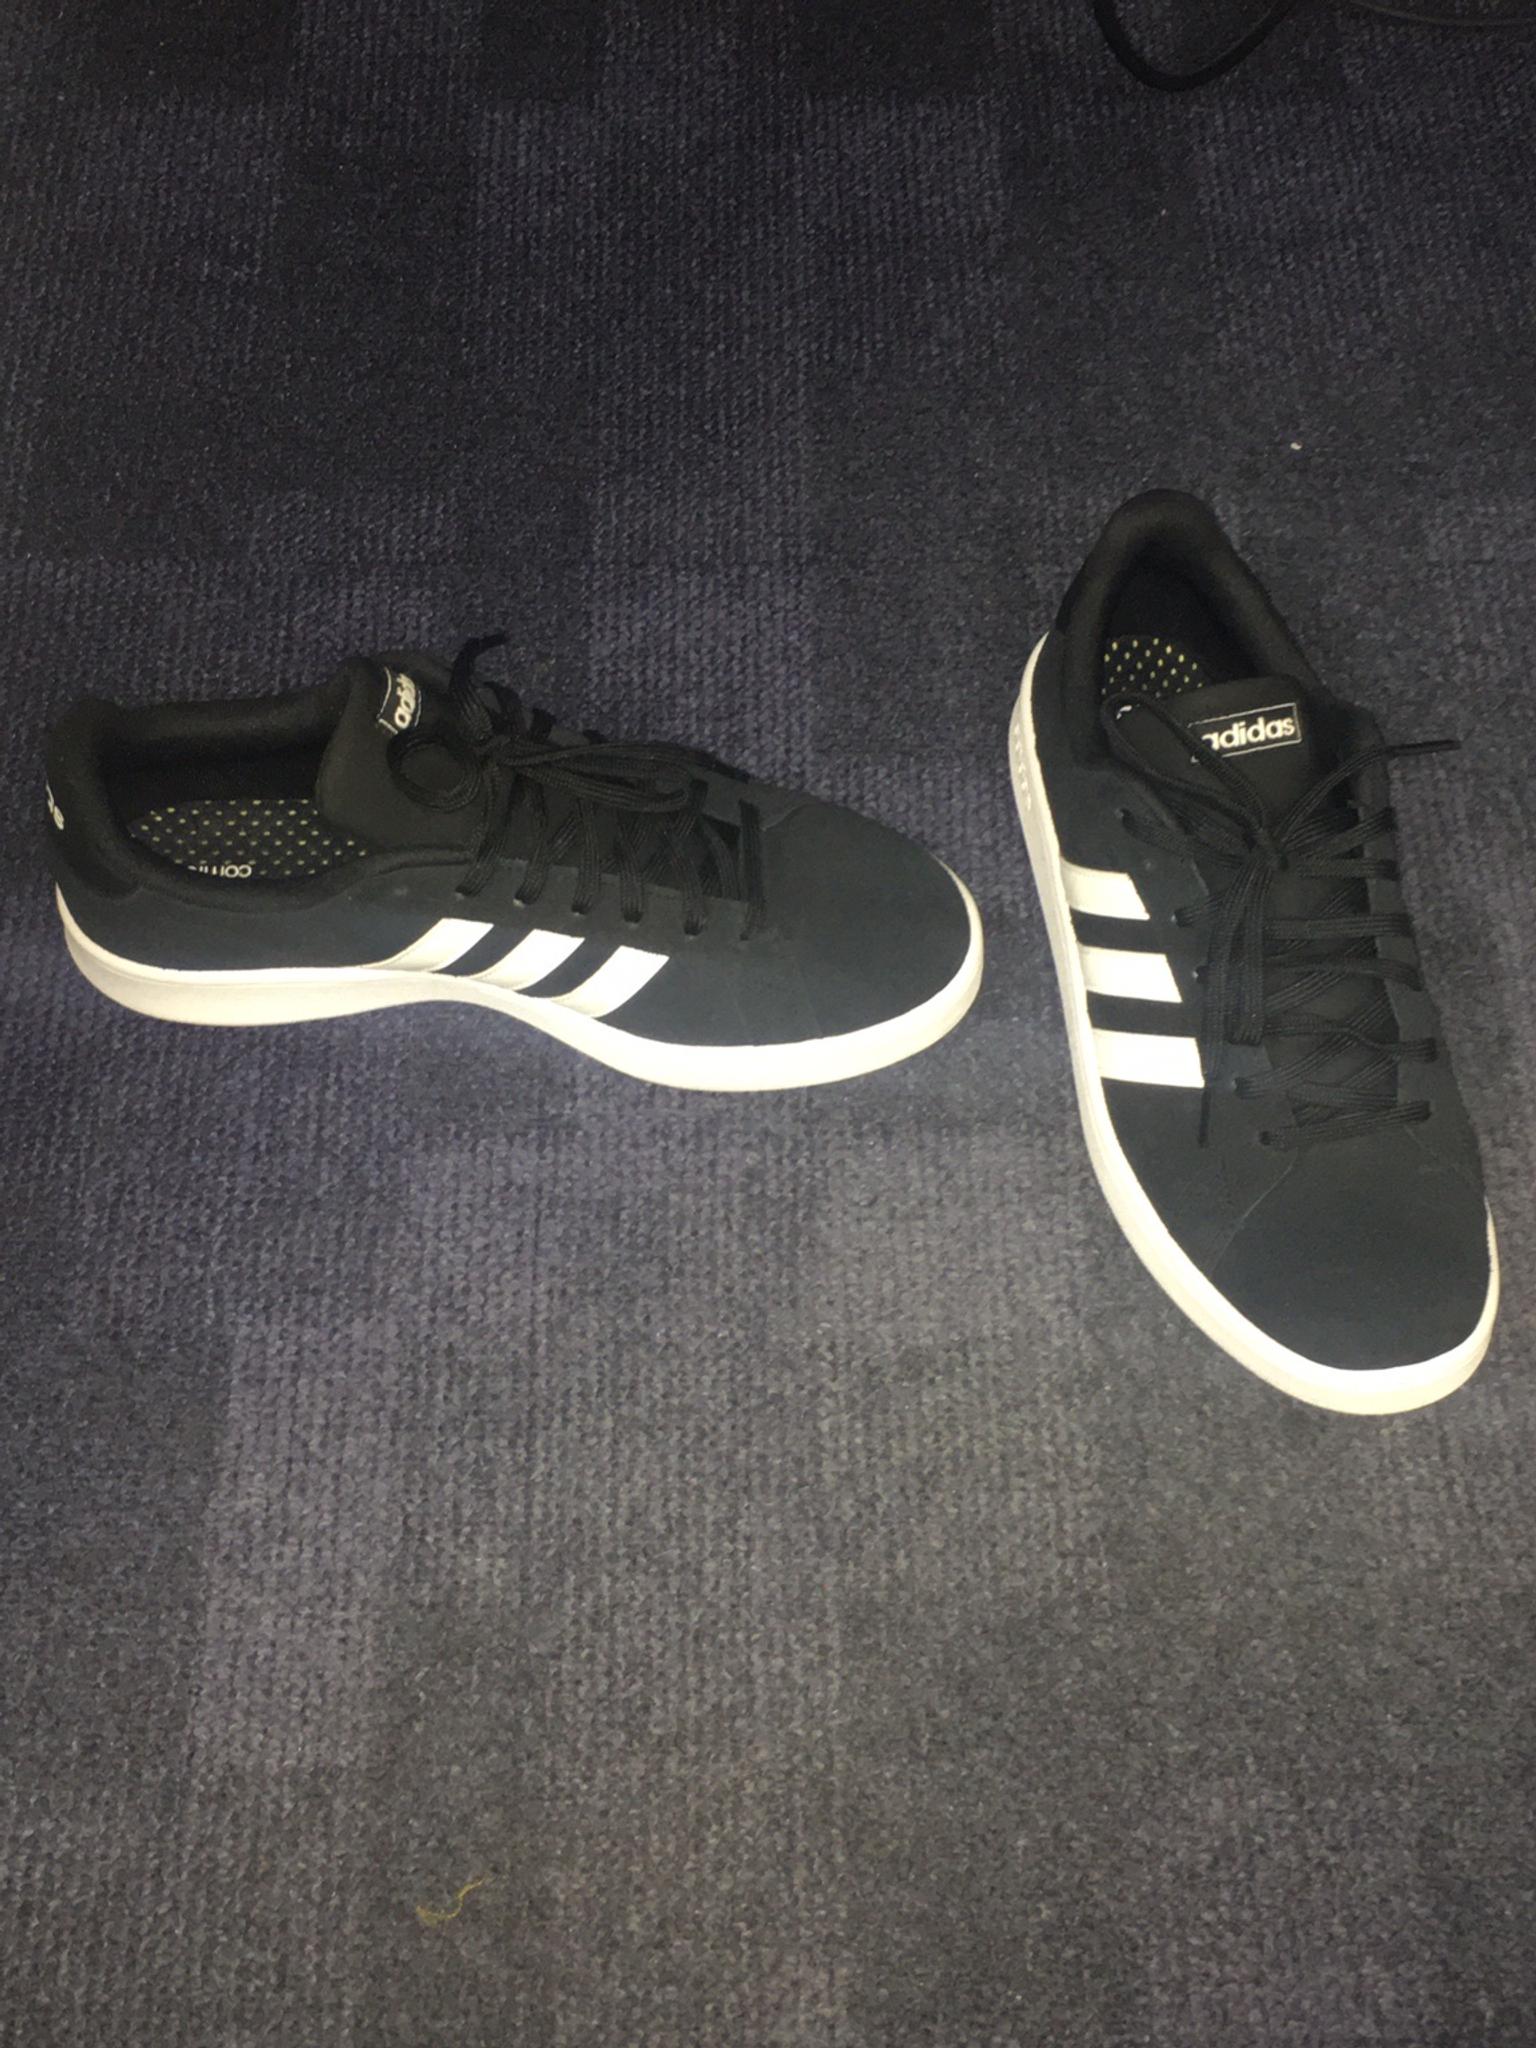 mens adidas trainers size 9 uk in SW6 